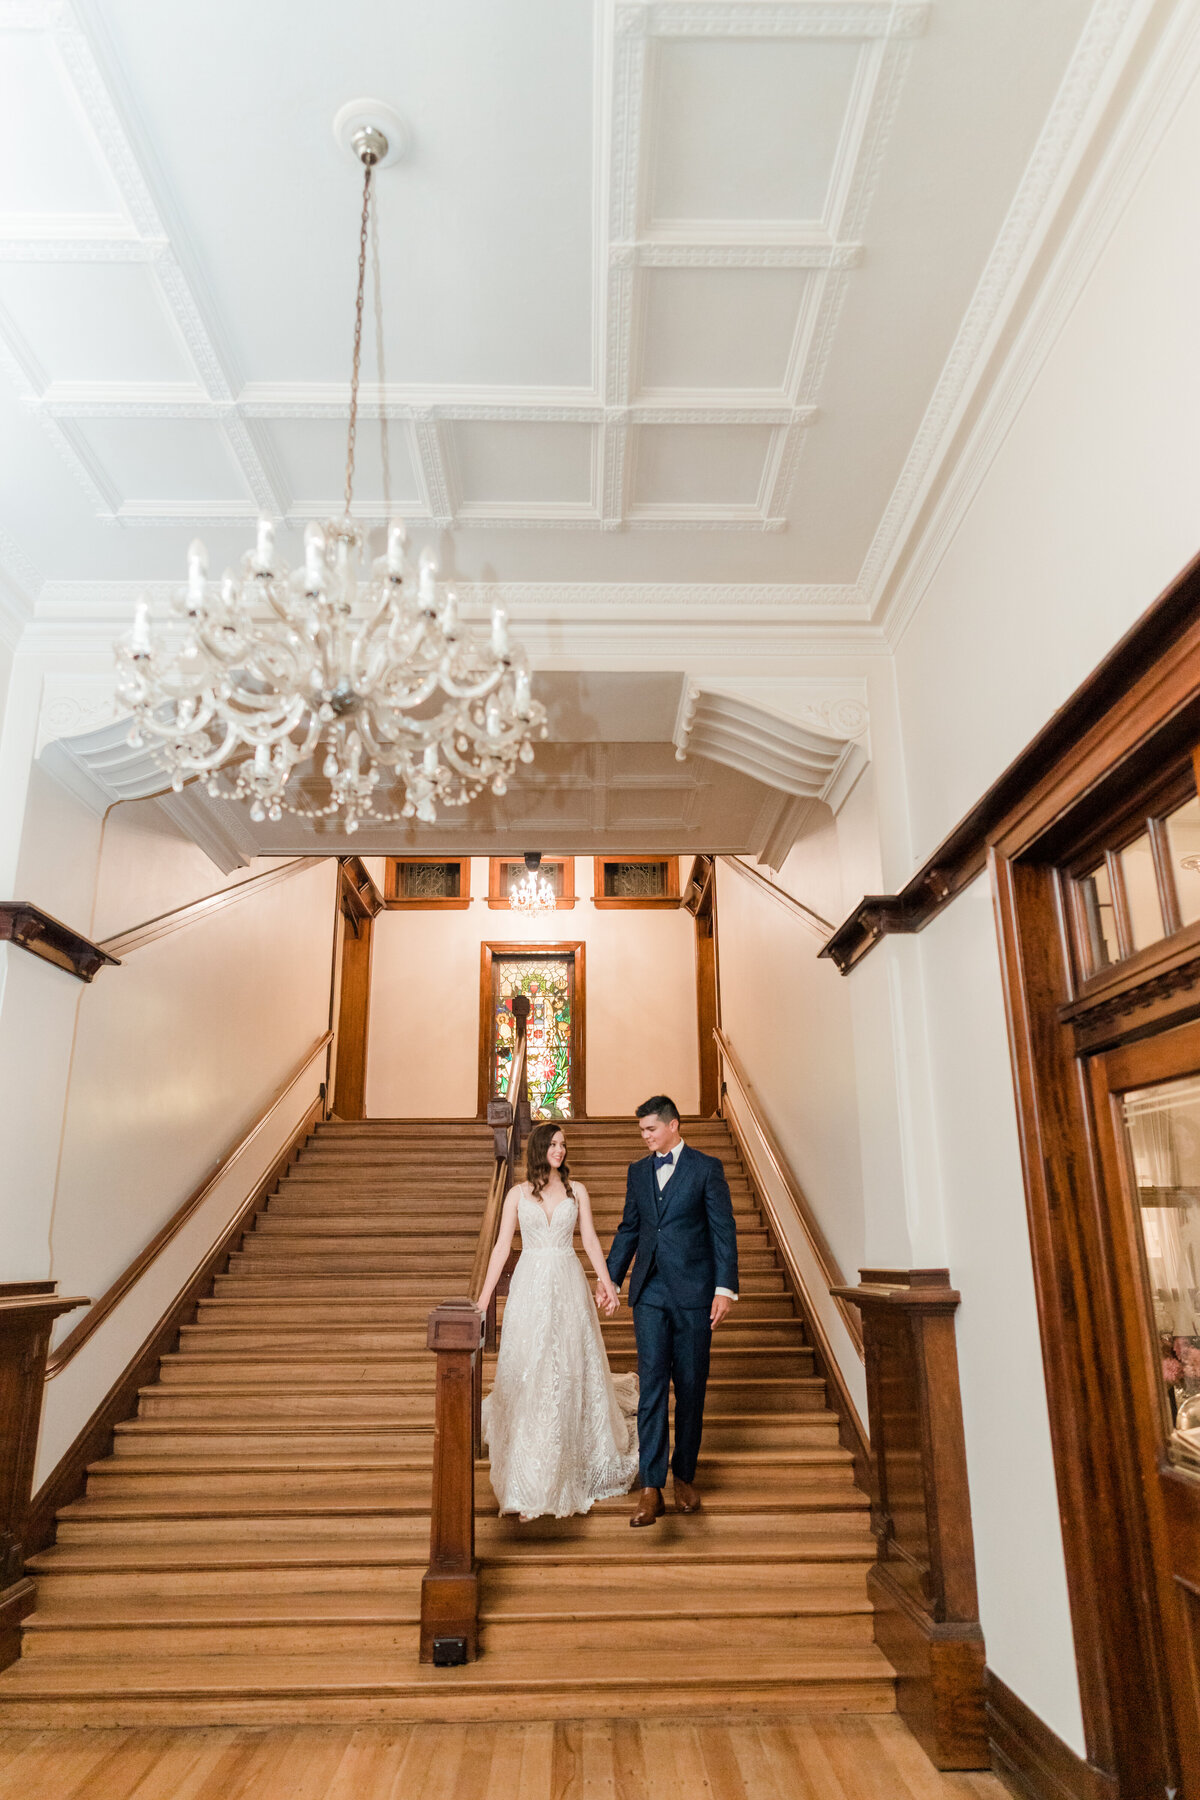 Wedding photography at The Robertson Hotel